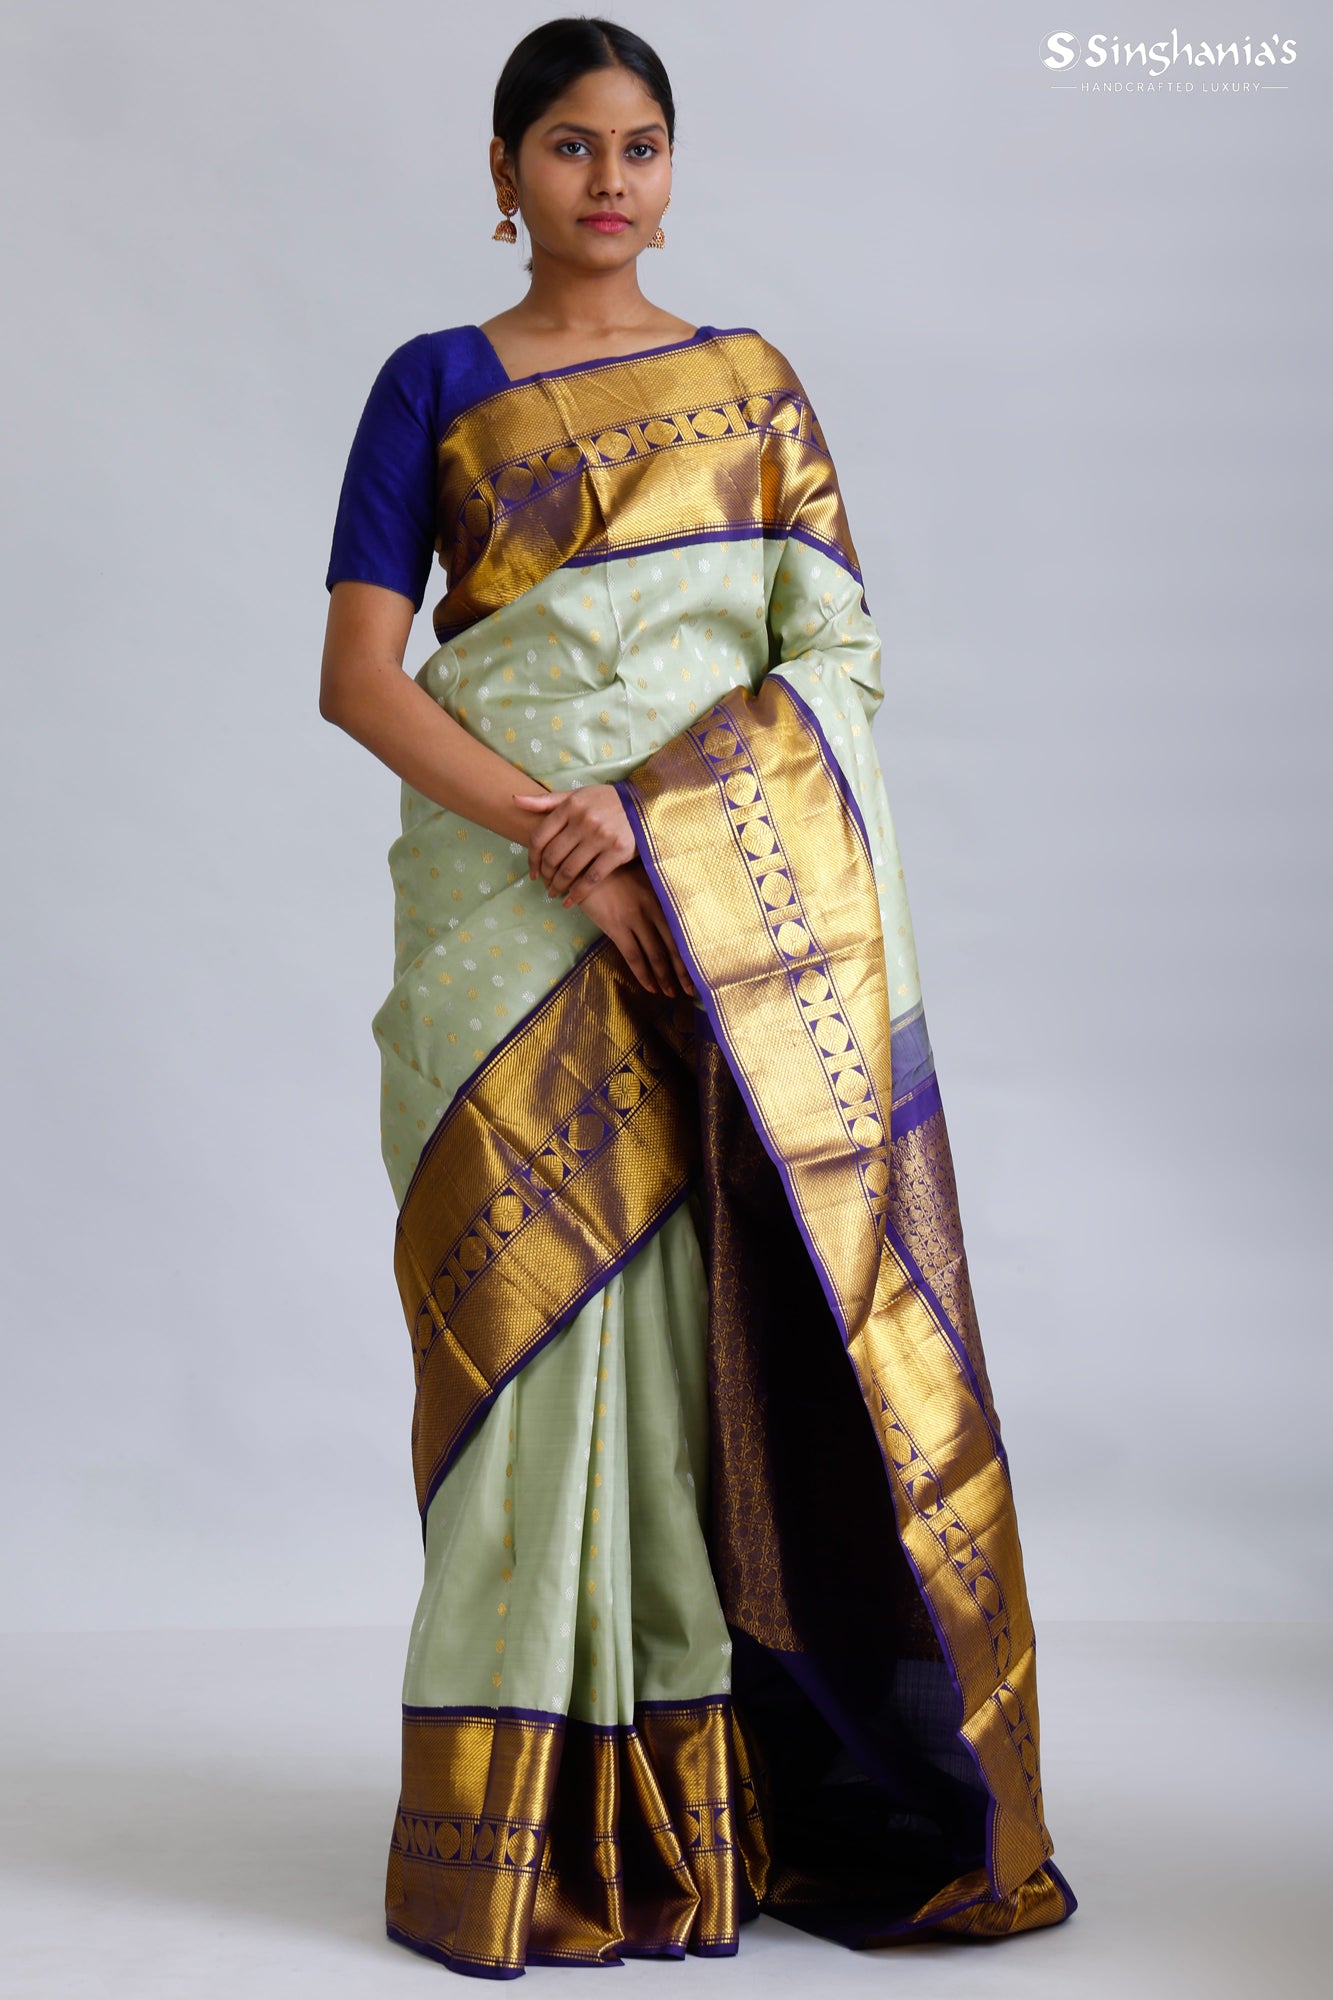 Stunning South Indian Bride In Chokers With Kanjeevaram Sarees